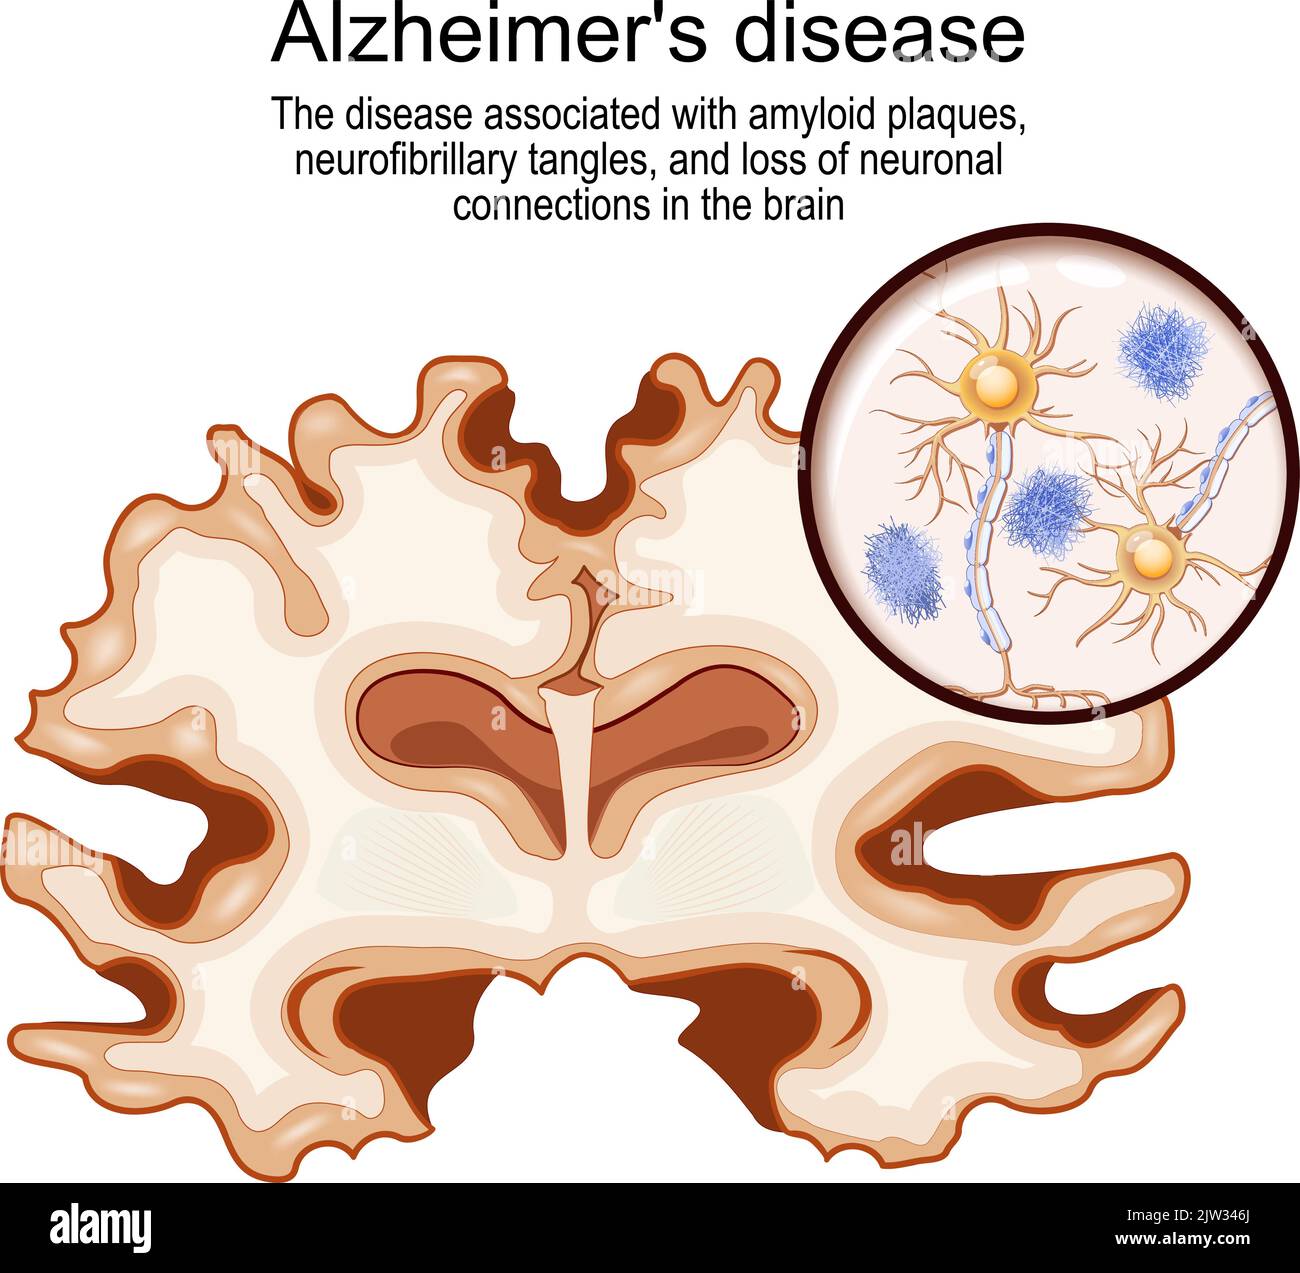 Alzheimer's disease. disease associated with amyloid plaques, neurofibrillary tangles, and loss of neuronal connections in the brain. human brain with Stock Vector